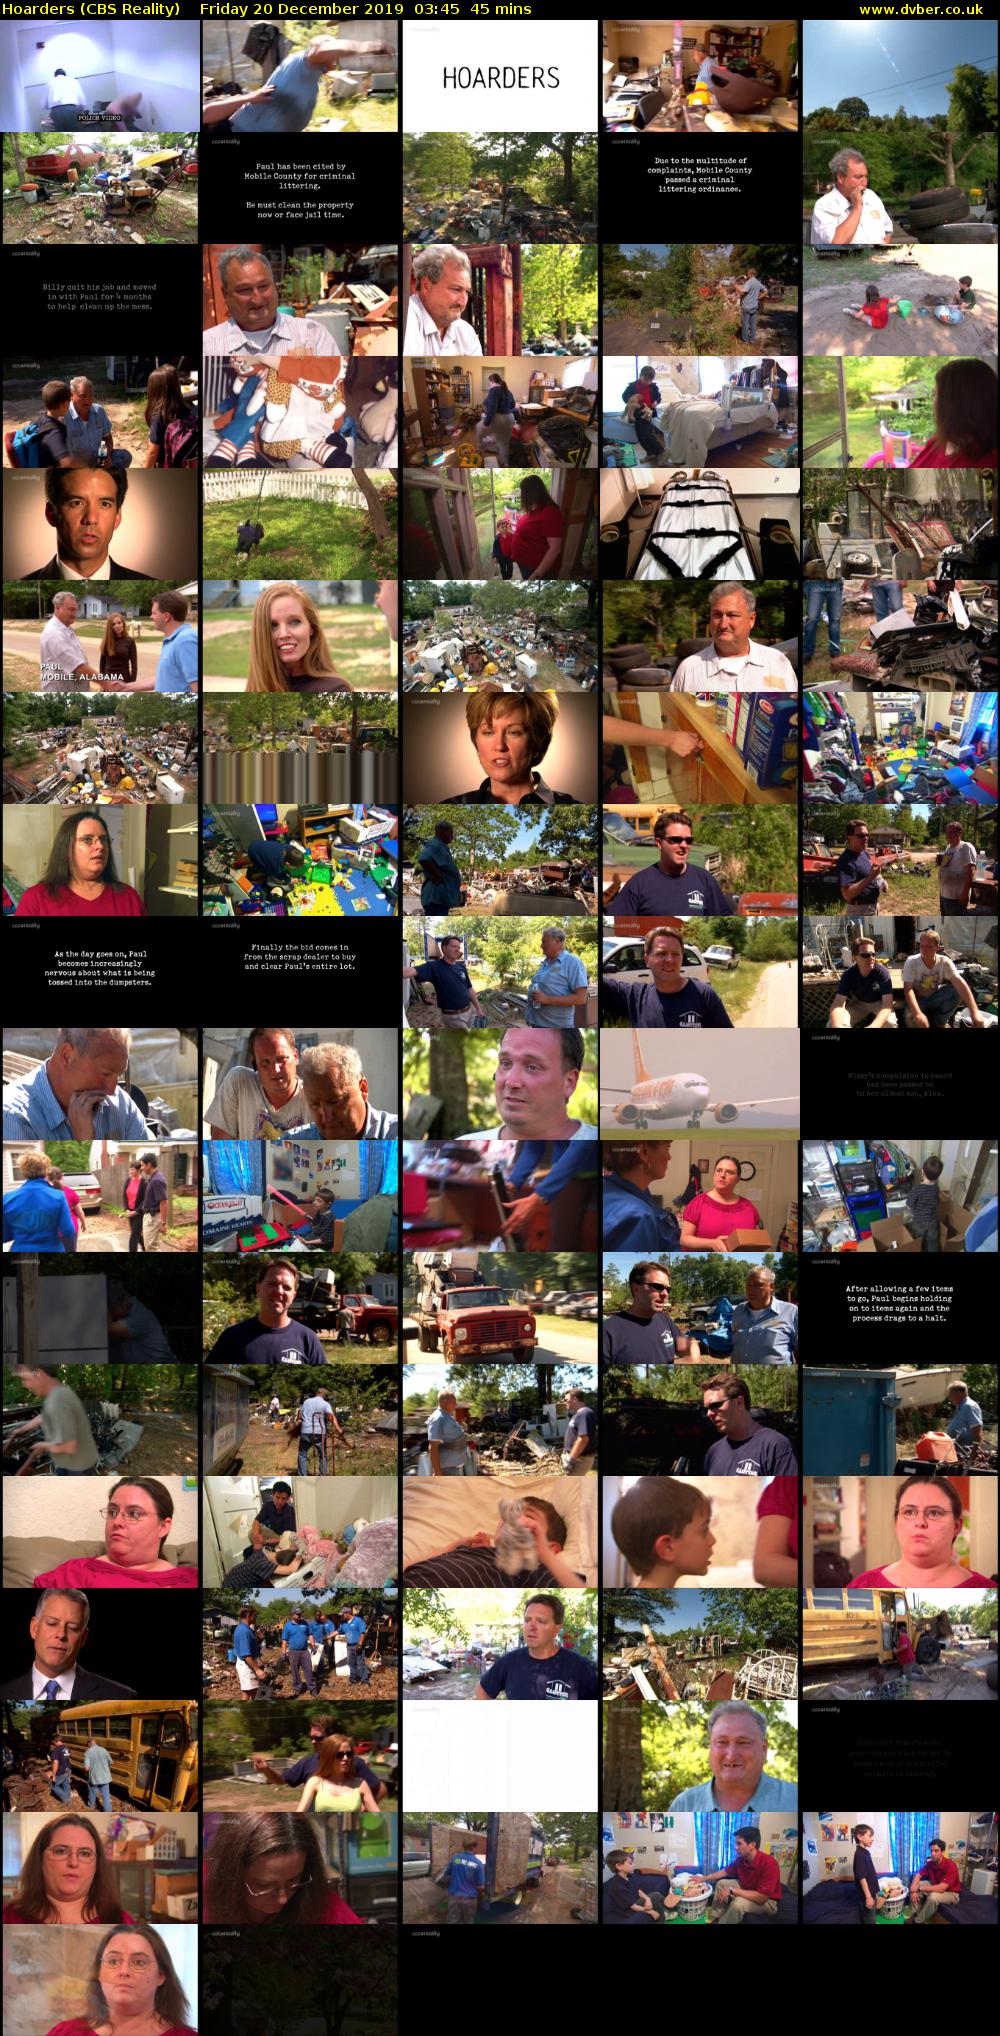 Hoarders (CBS Reality) Friday 20 December 2019 03:45 - 04:30